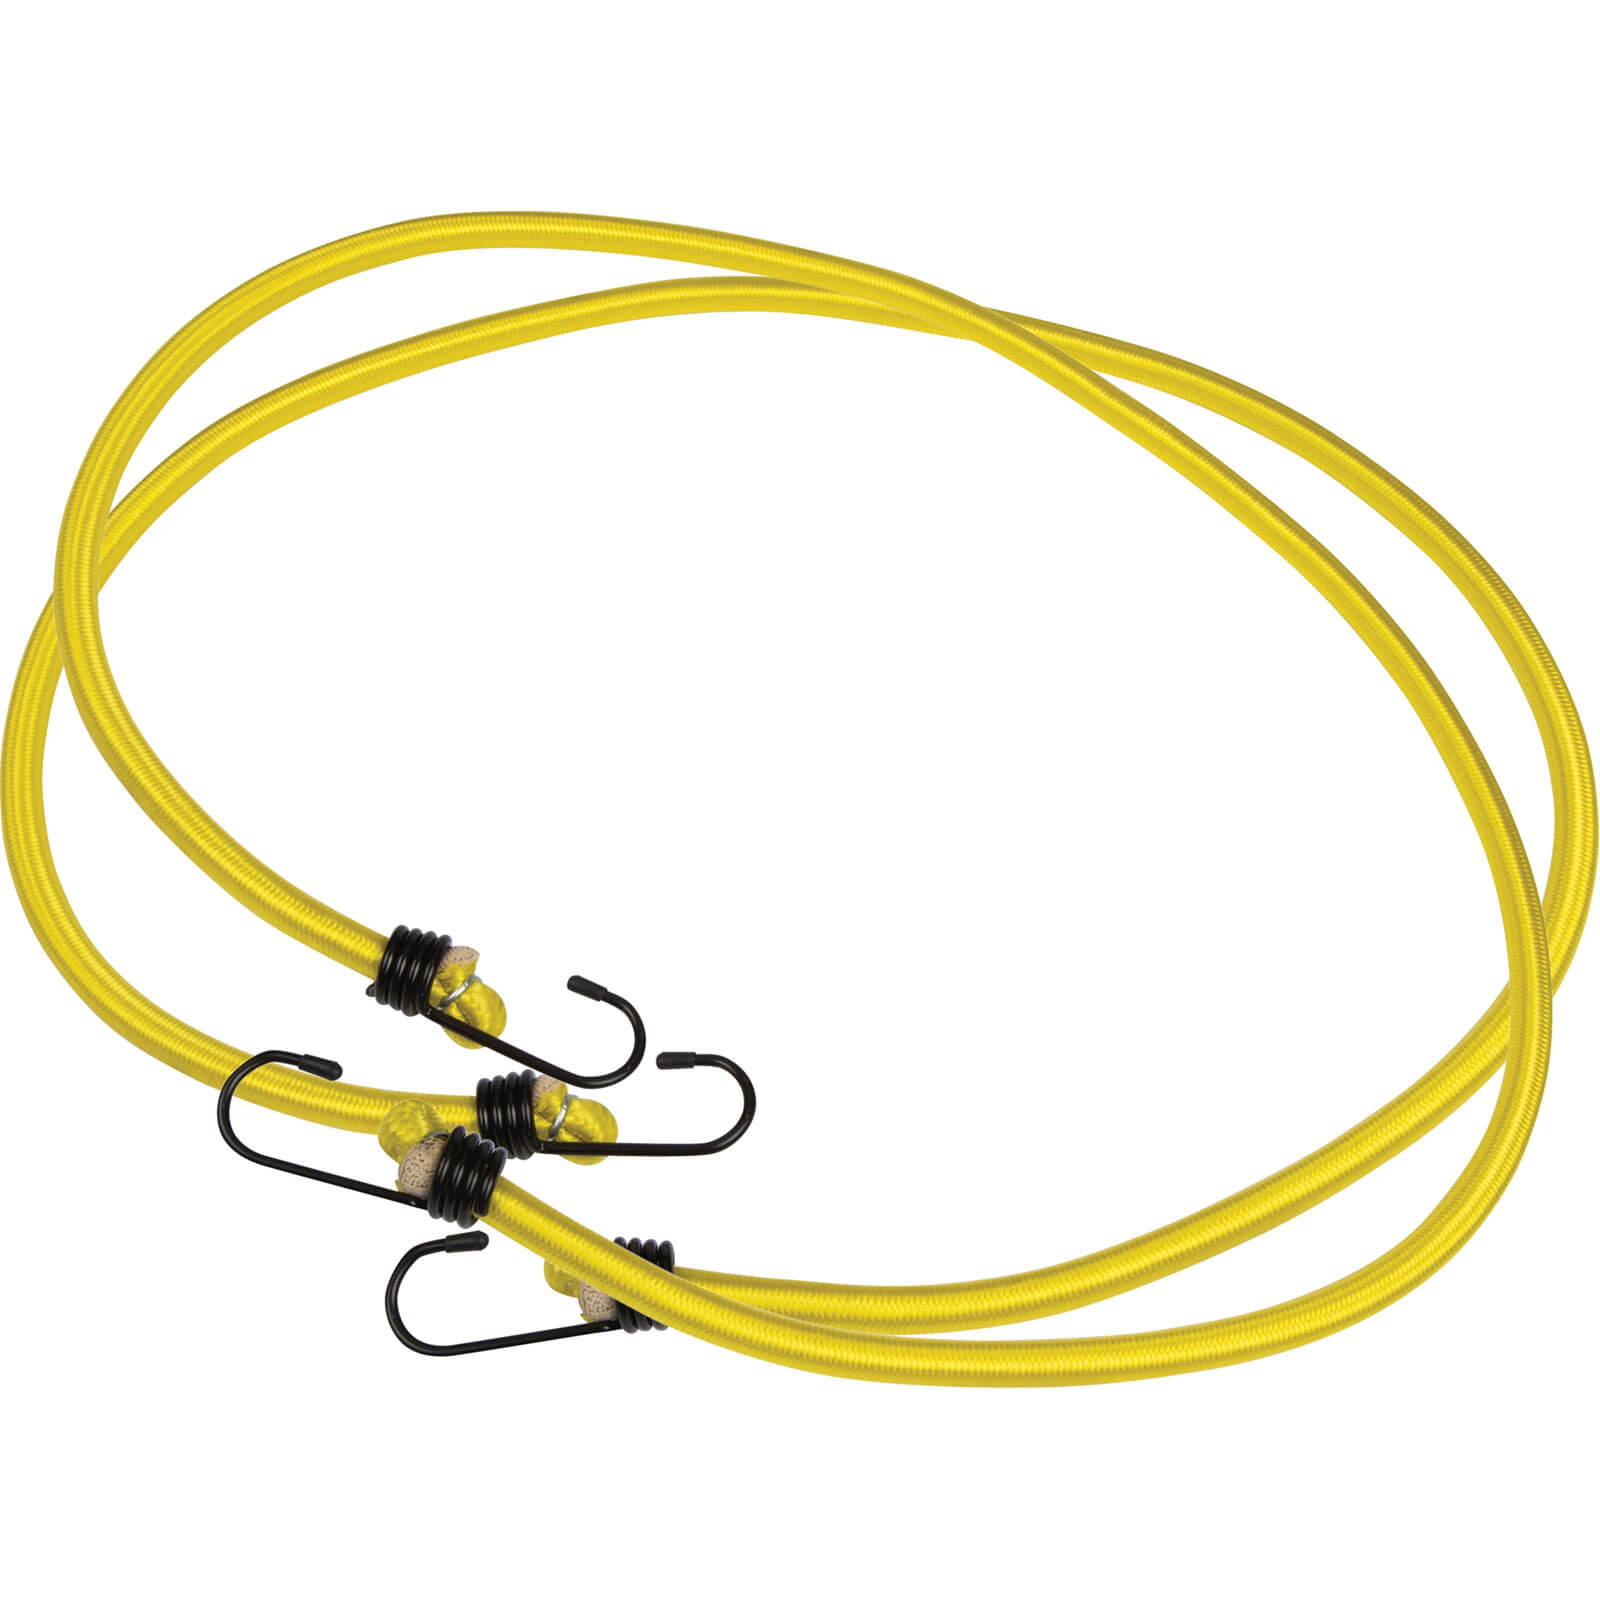 Image of BlueSpot Bungee Cords 1200mm Yellow Pack of 2